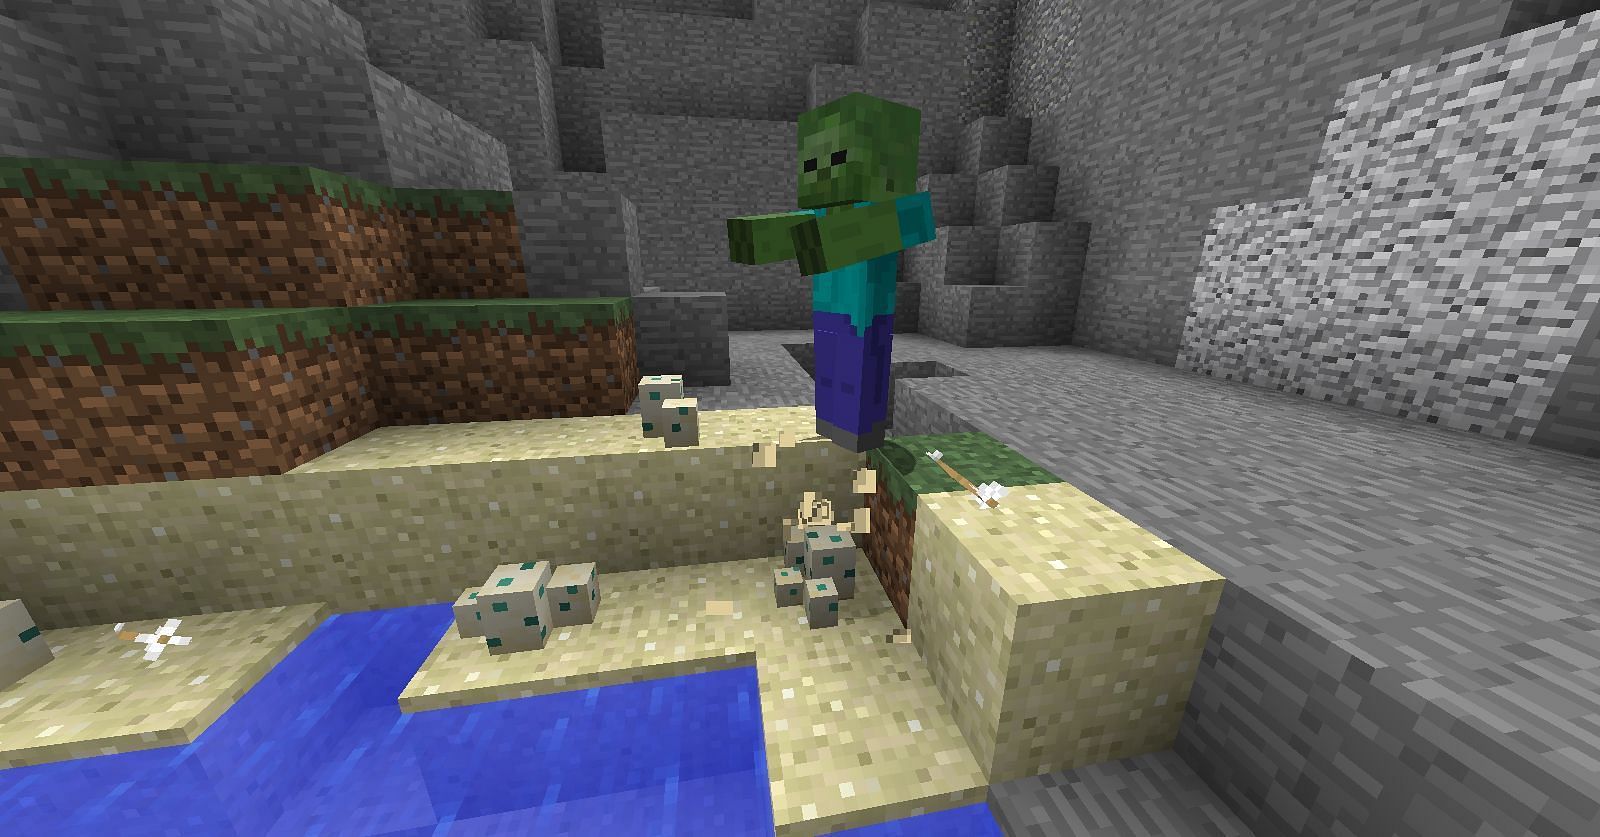 Zombie stomping on the turtle eggs (Image via Minecraft Wiki)